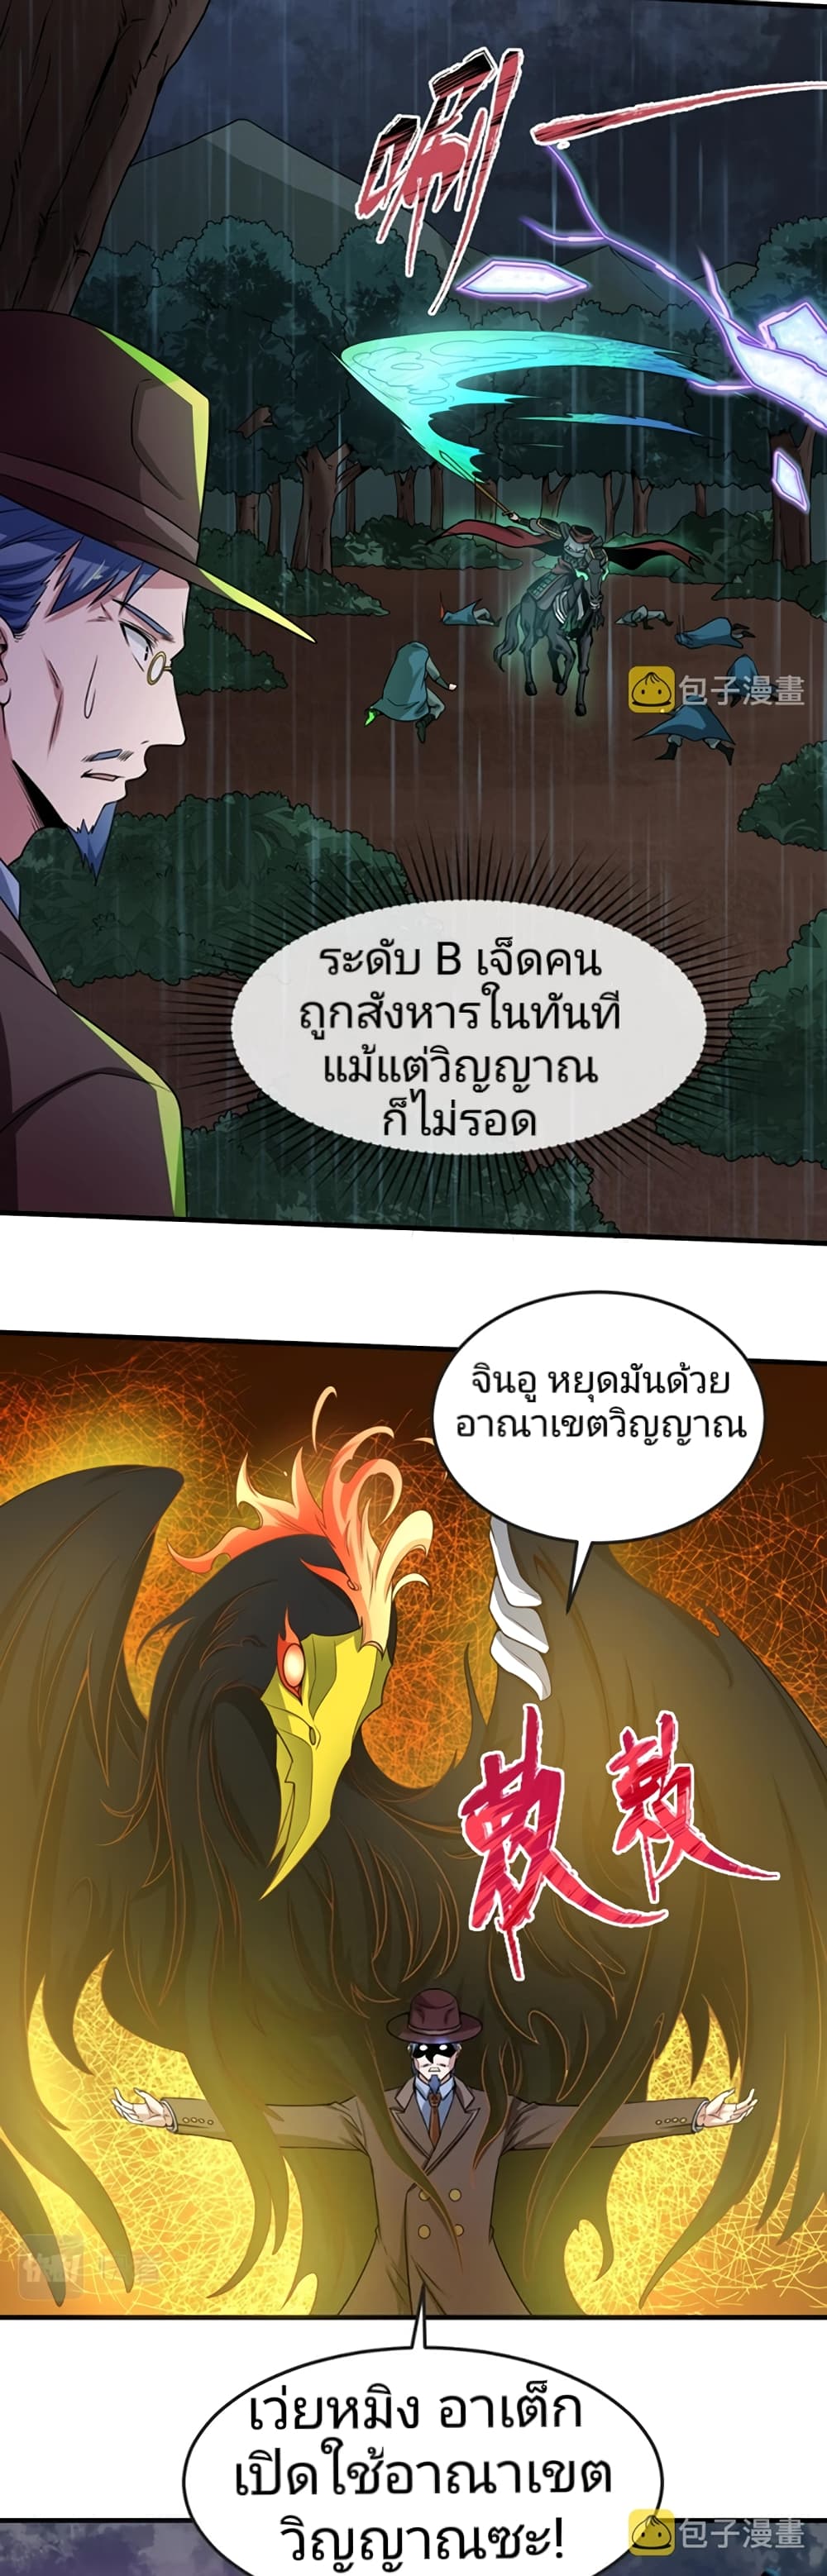 The Age of Ghost Spirits à¸à¸­à¸à¸à¸µà¹ 22 (8)